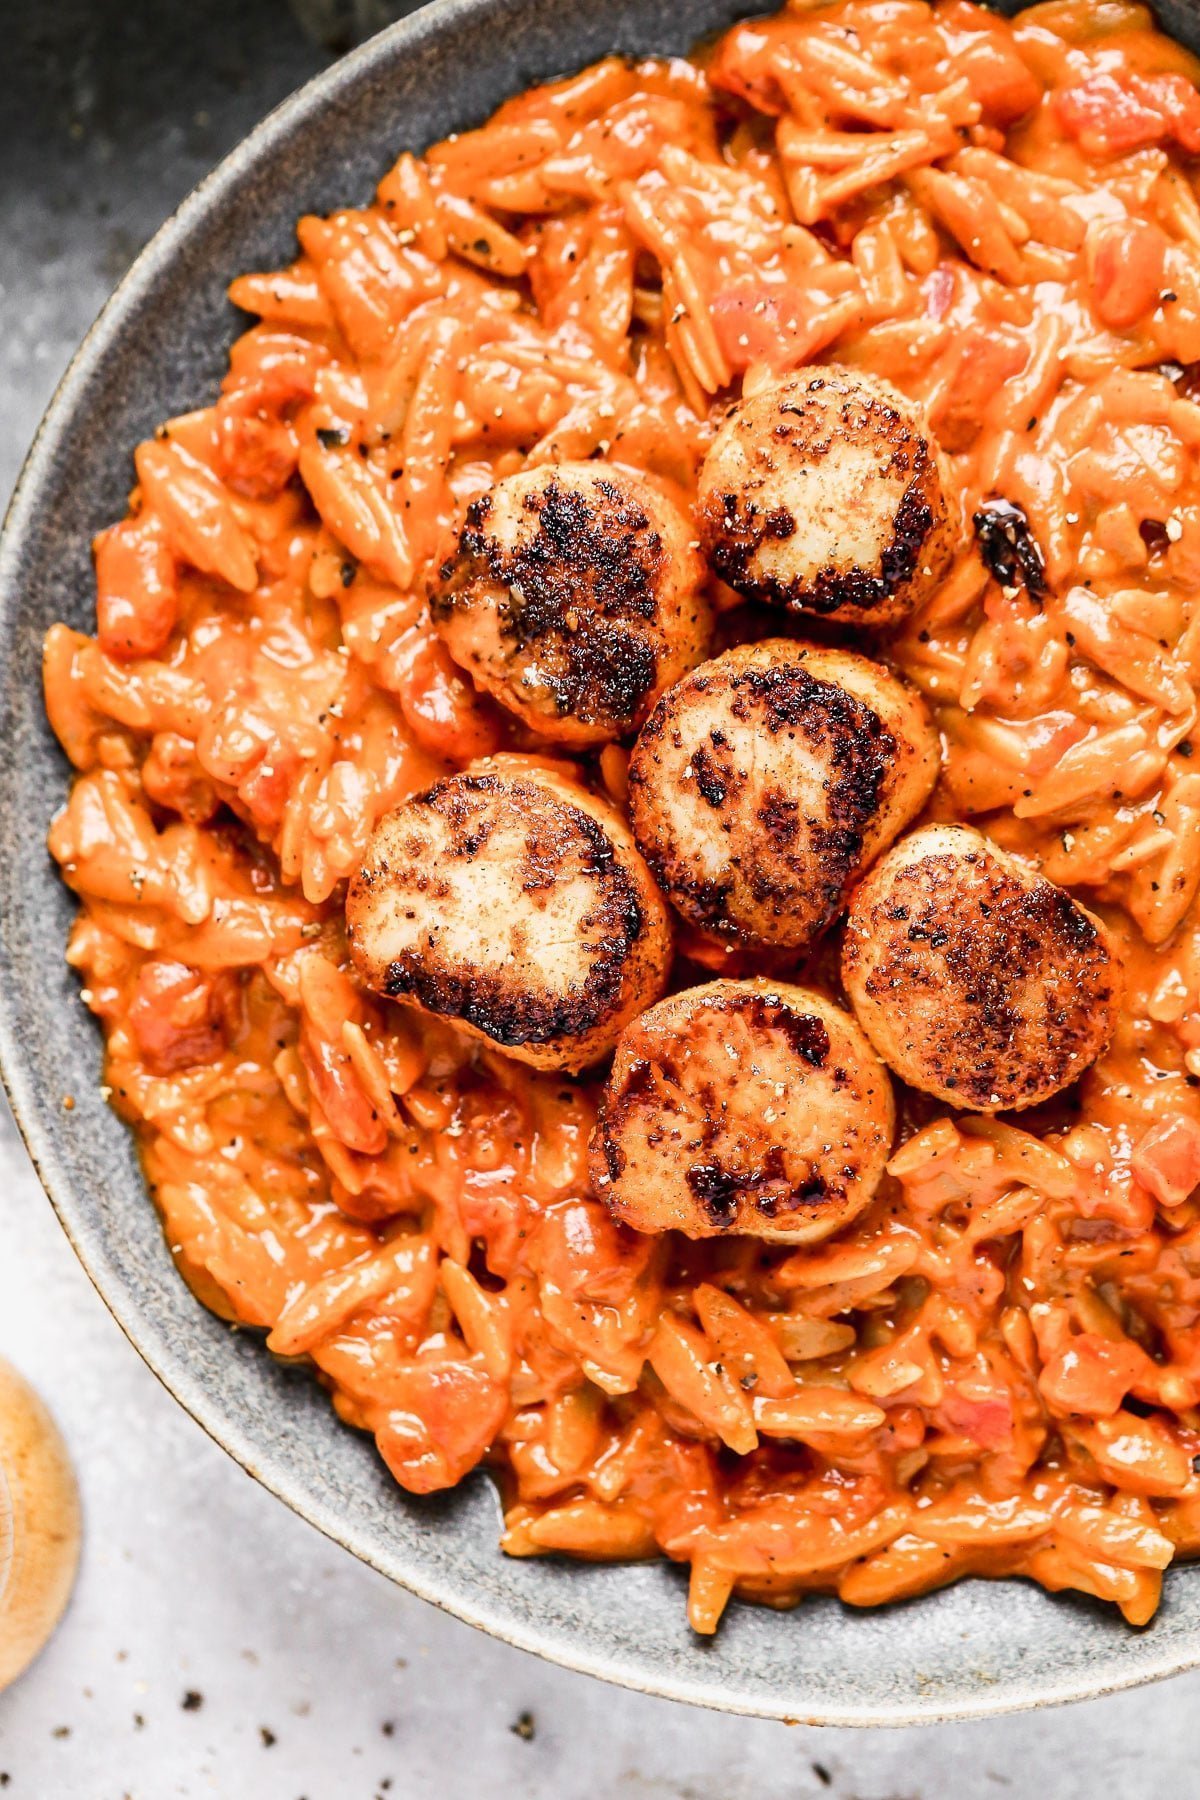 Our&nbsp;Buttery Tomato Orzo with Blackened Scallops&nbsp;has all of the creaminess of a&nbsp;traditional risotto, but is made a little bit healthier with the addition of whole-wheat orzo. It's packed with luscious tomato flavor rivaling the most perfect marinara and hints of nutty brown butter, making it my current favorite thing to eat. We serve ours with perfectly seared blackened scallops, but the protein of choice is up to you.&nbsp;